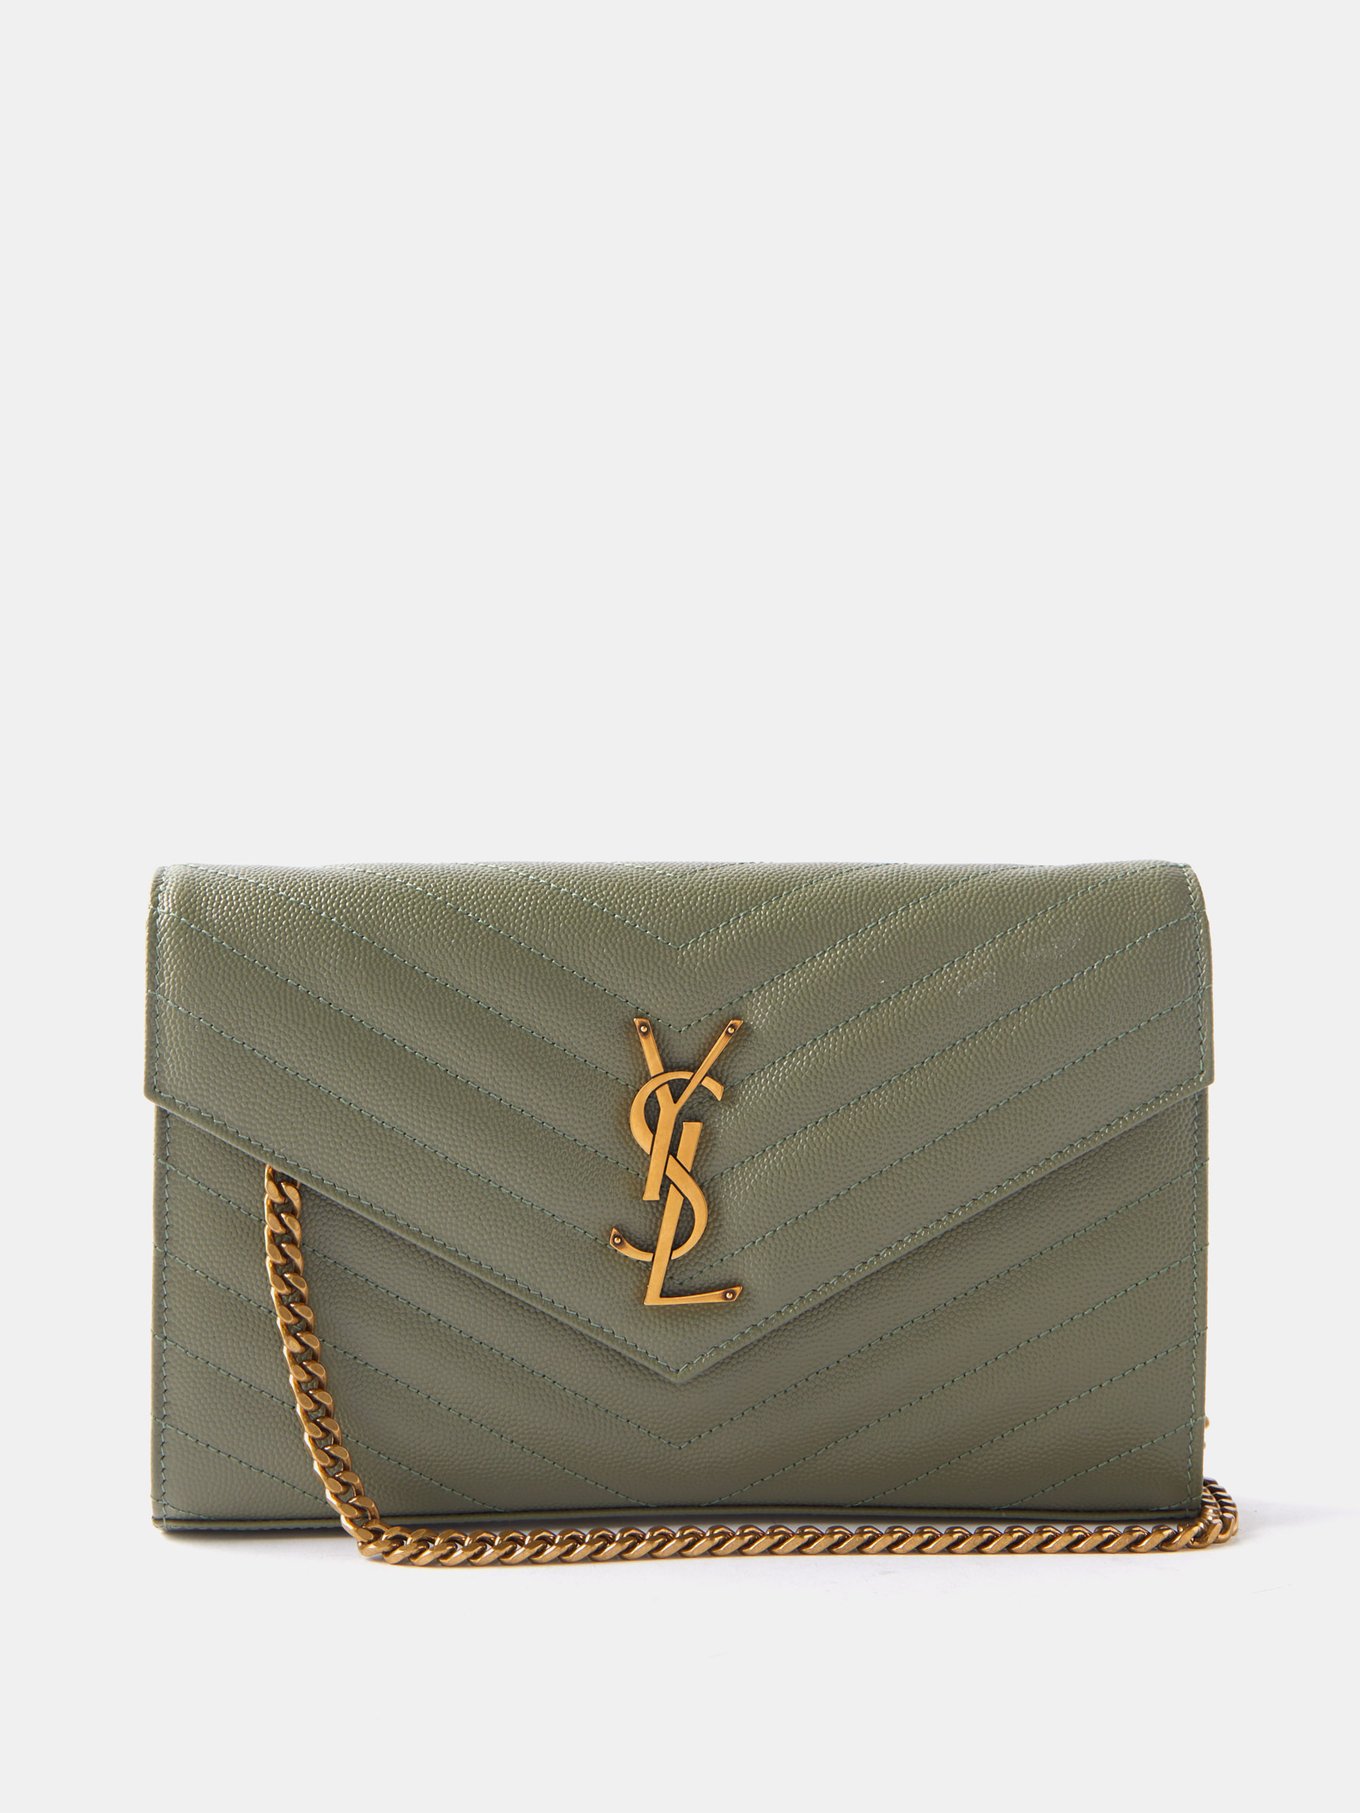 SAINT LAURENT Monogramme quilted leather pouch